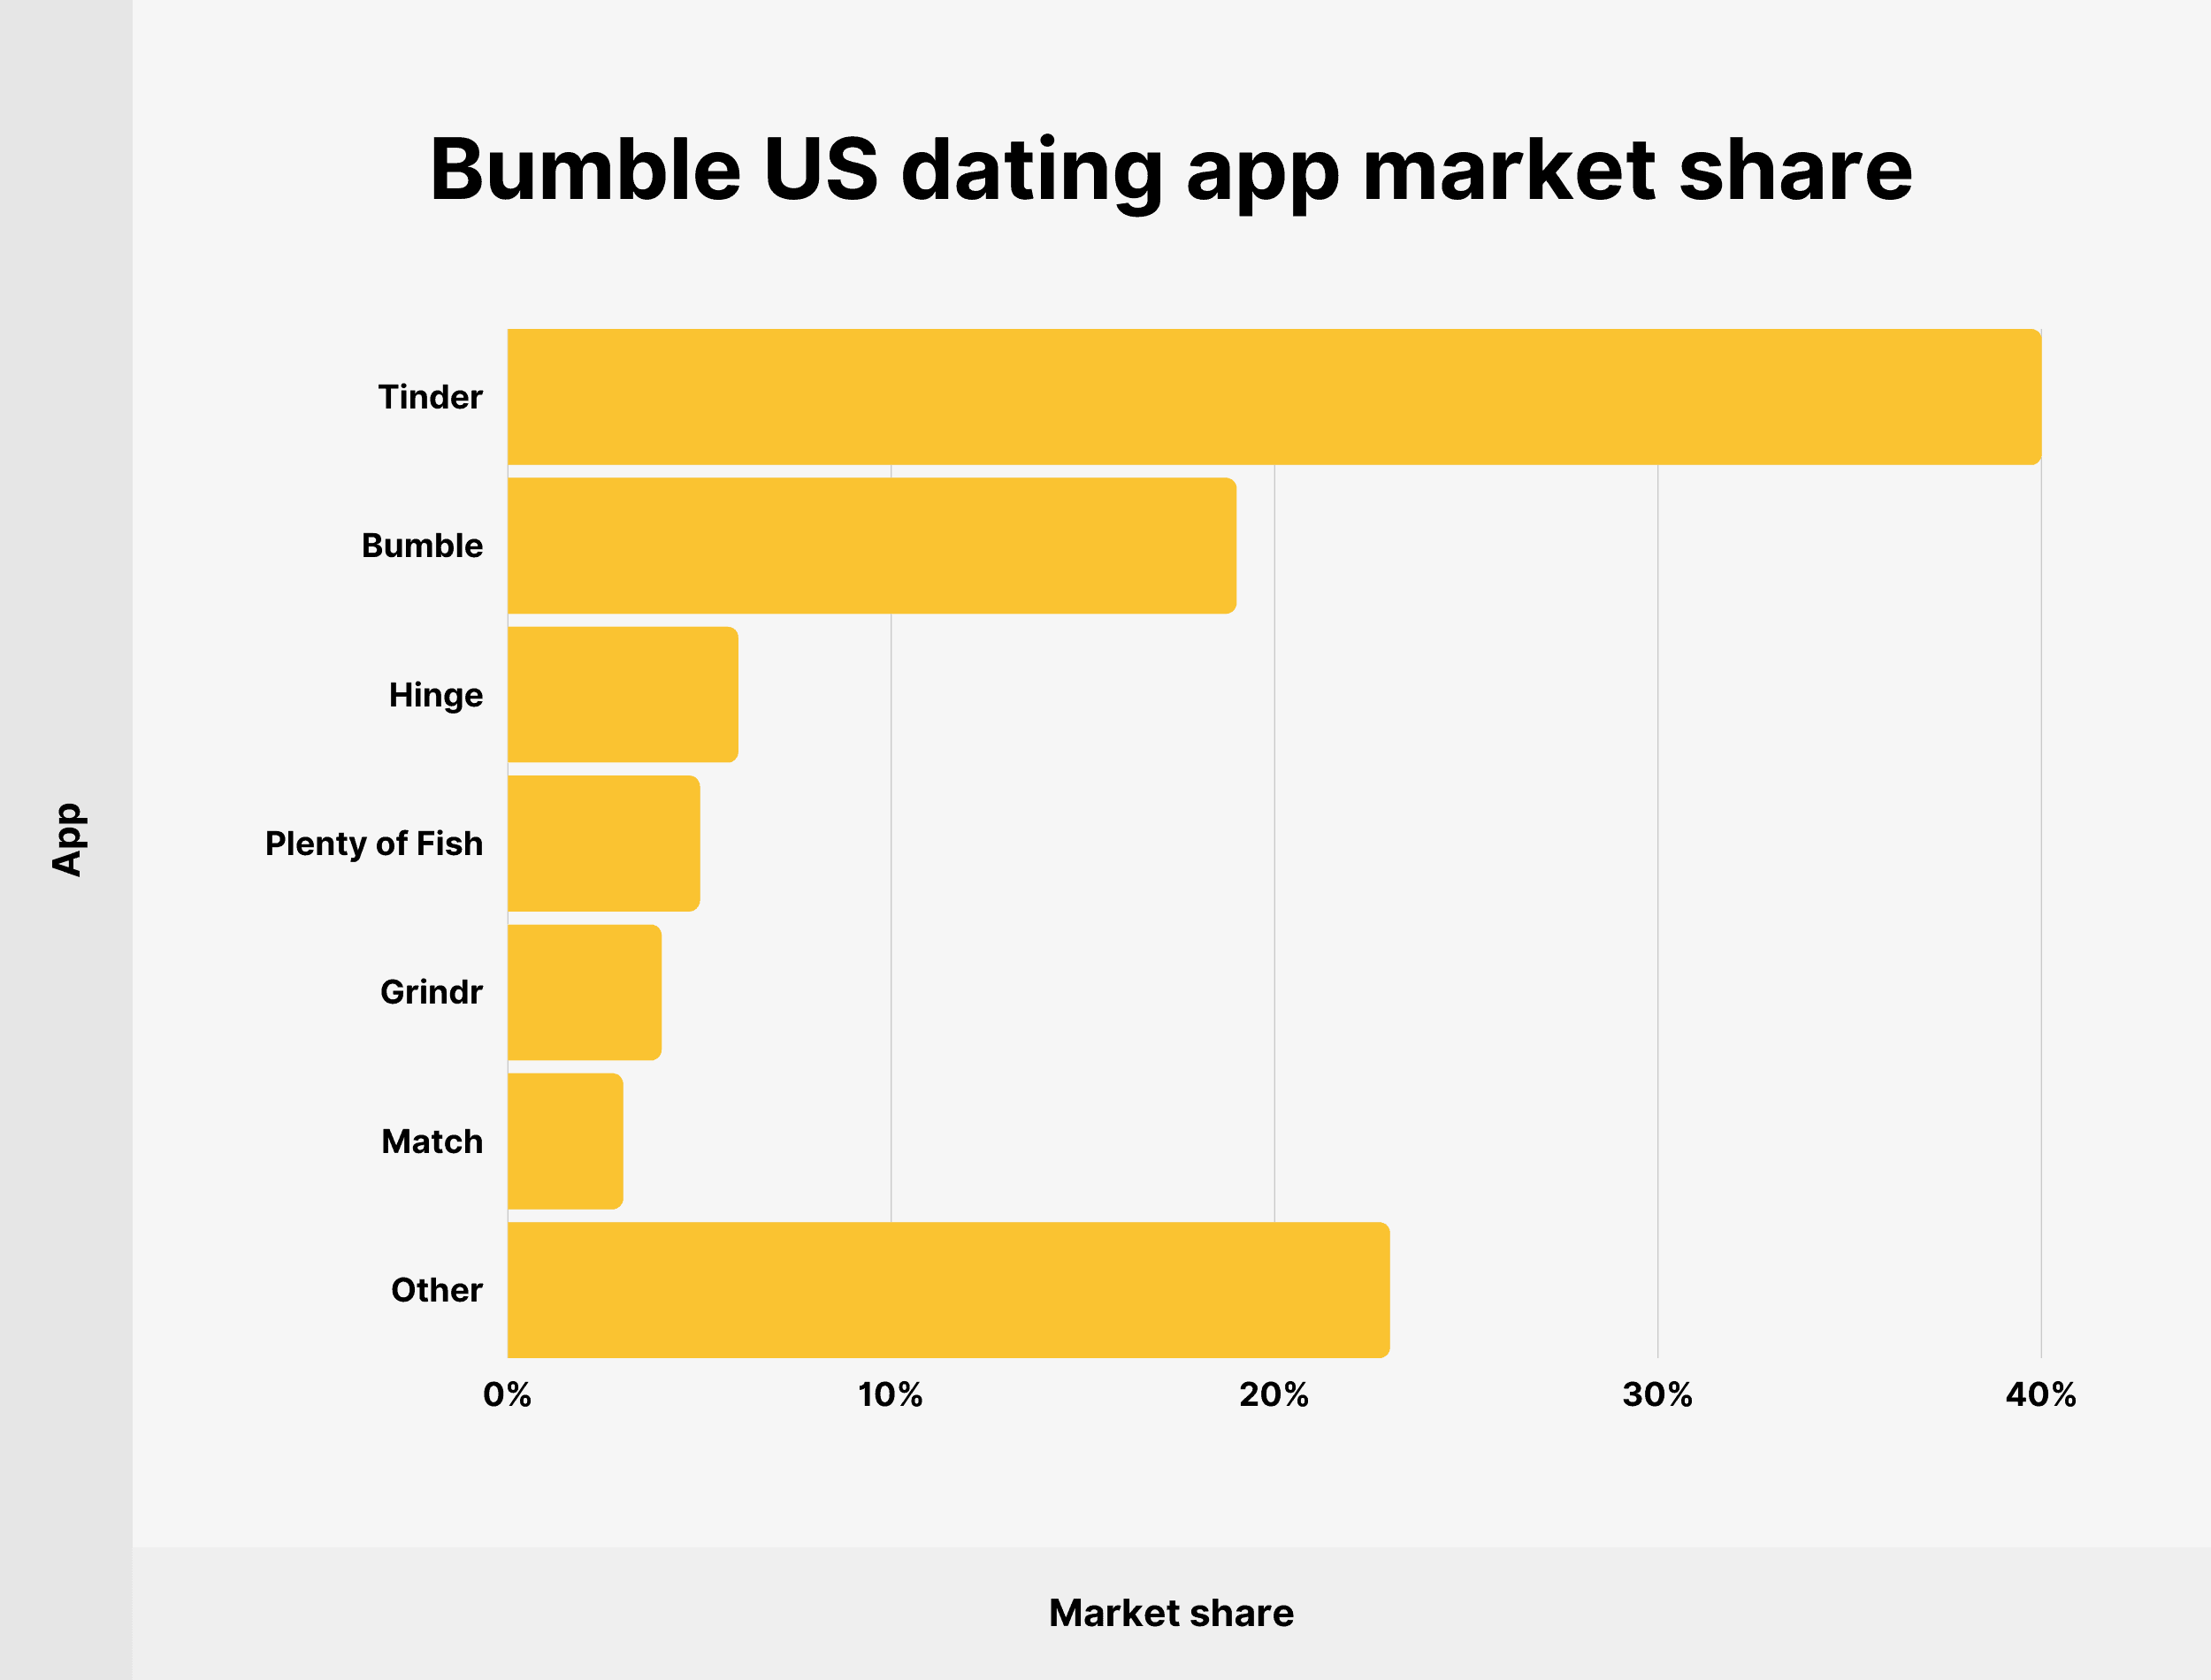 Bumble US dating app market share